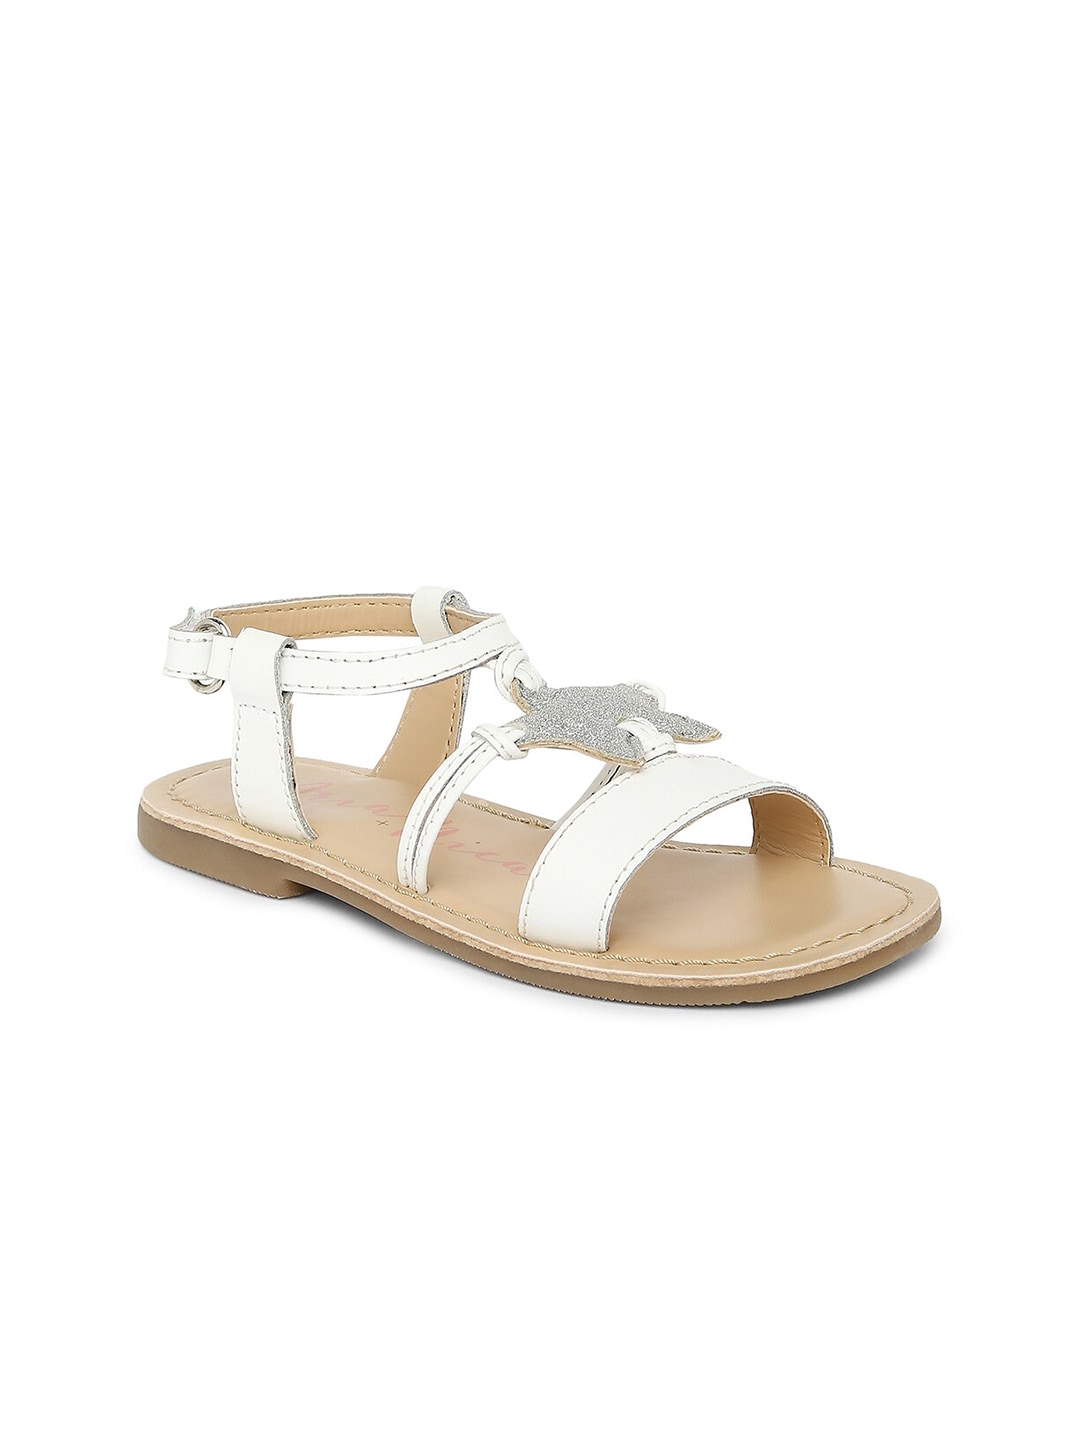 Aria Nica Girls White & Brown Leather Comfort Sandals